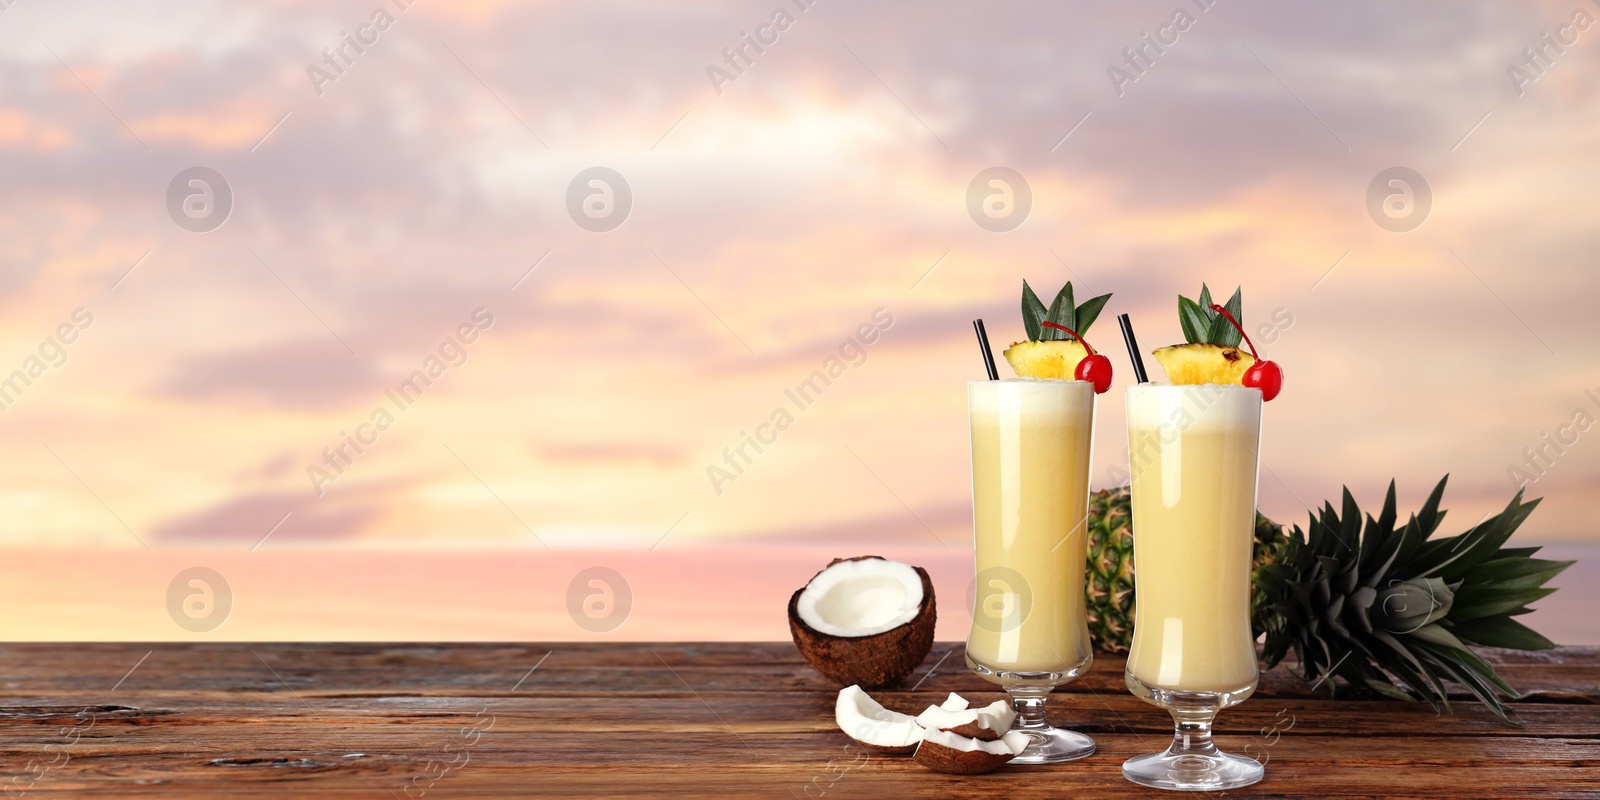 Image of Tasty Pina Colada cocktail on wooden table at sunset, space for text. Banner design